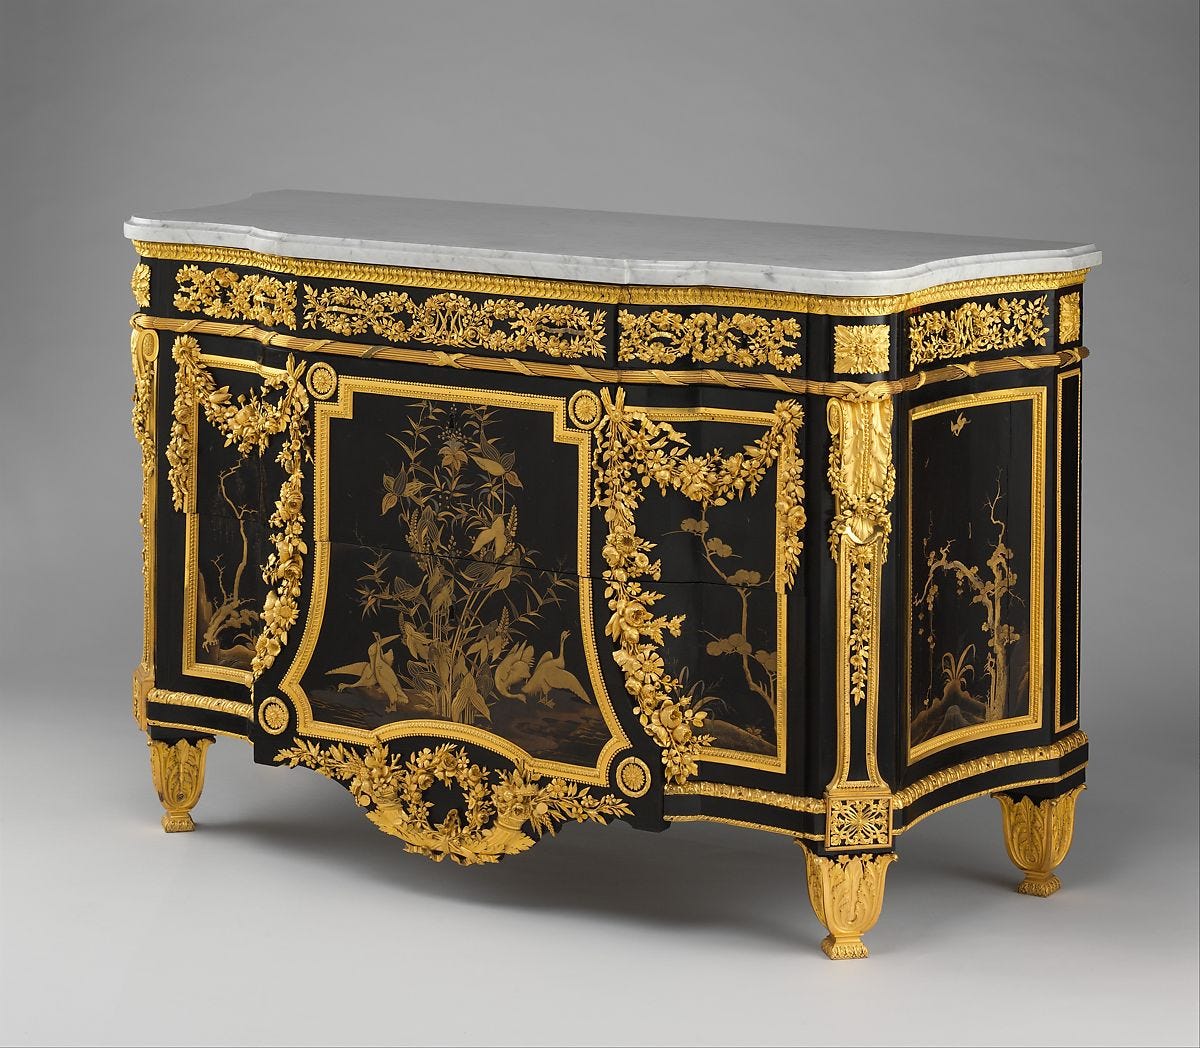 Commode (Secrétaire à abattant), Jean Henri Riesener (French, Gladbeck, North Rhine-Westphalia 1734–1806 Paris), Oak veneered with ebony and 17th-century Japanese lacquer; interiors veneered with tulipwood, amaranth, holly, and ebonized holly; gilt-bronze mounts; marble top; velvet (not original), French, Paris 